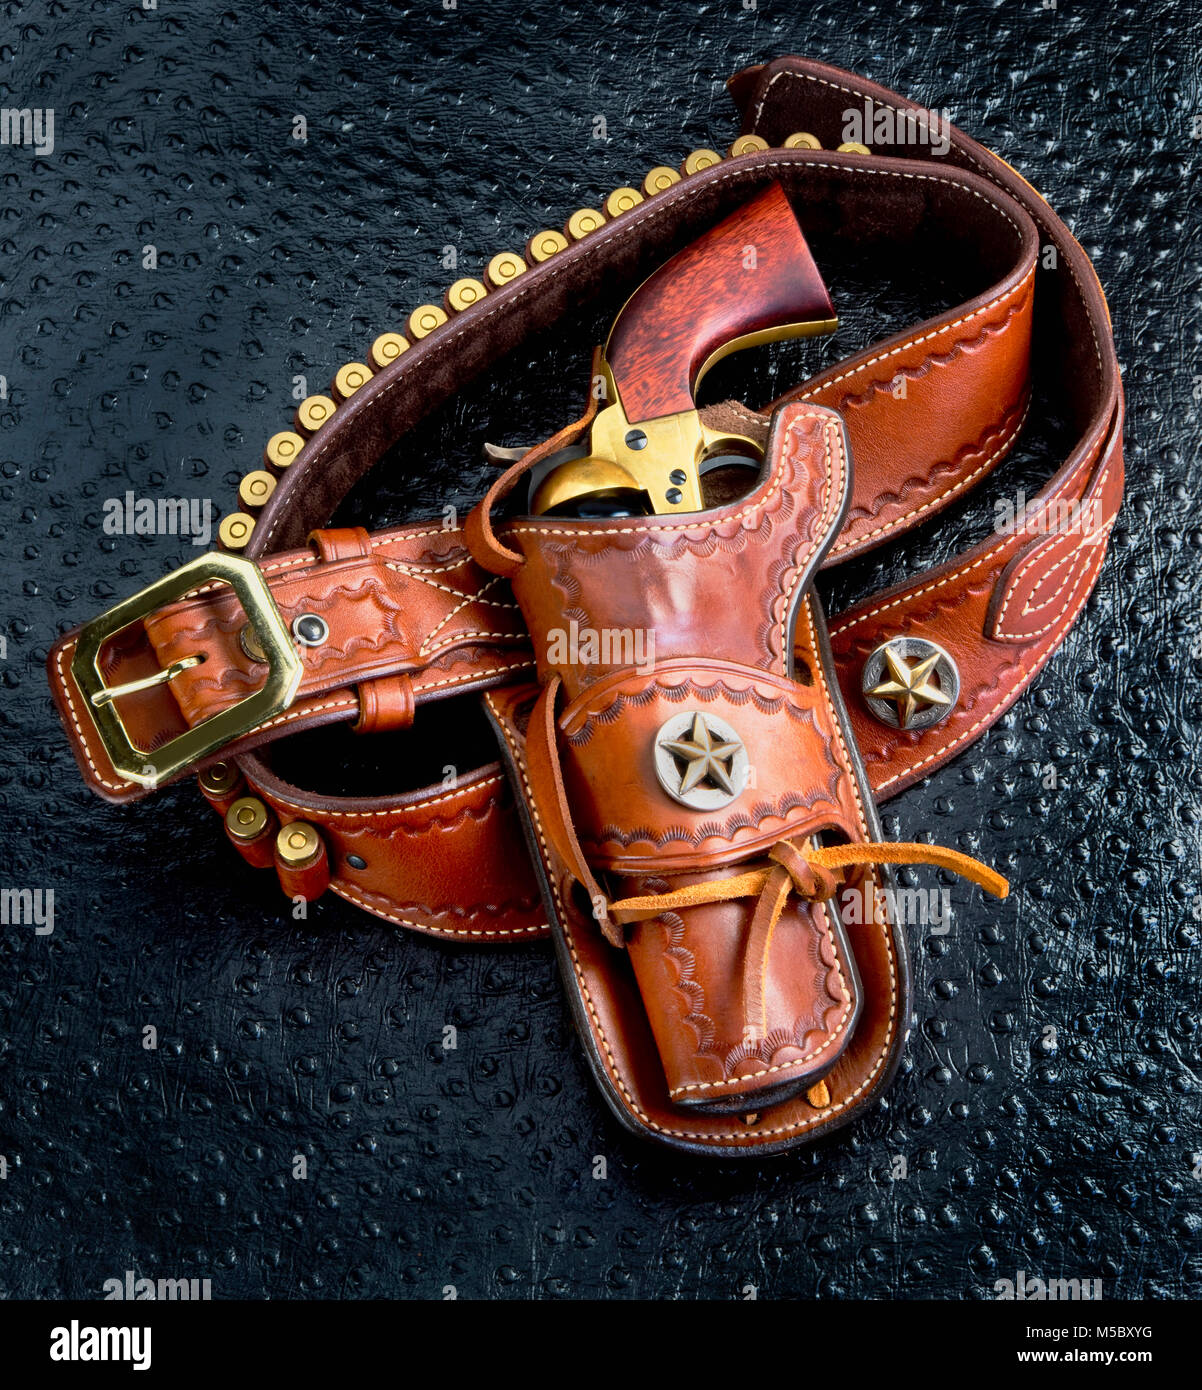 Leather Western Holster - Collector's Armoury, Ltd.